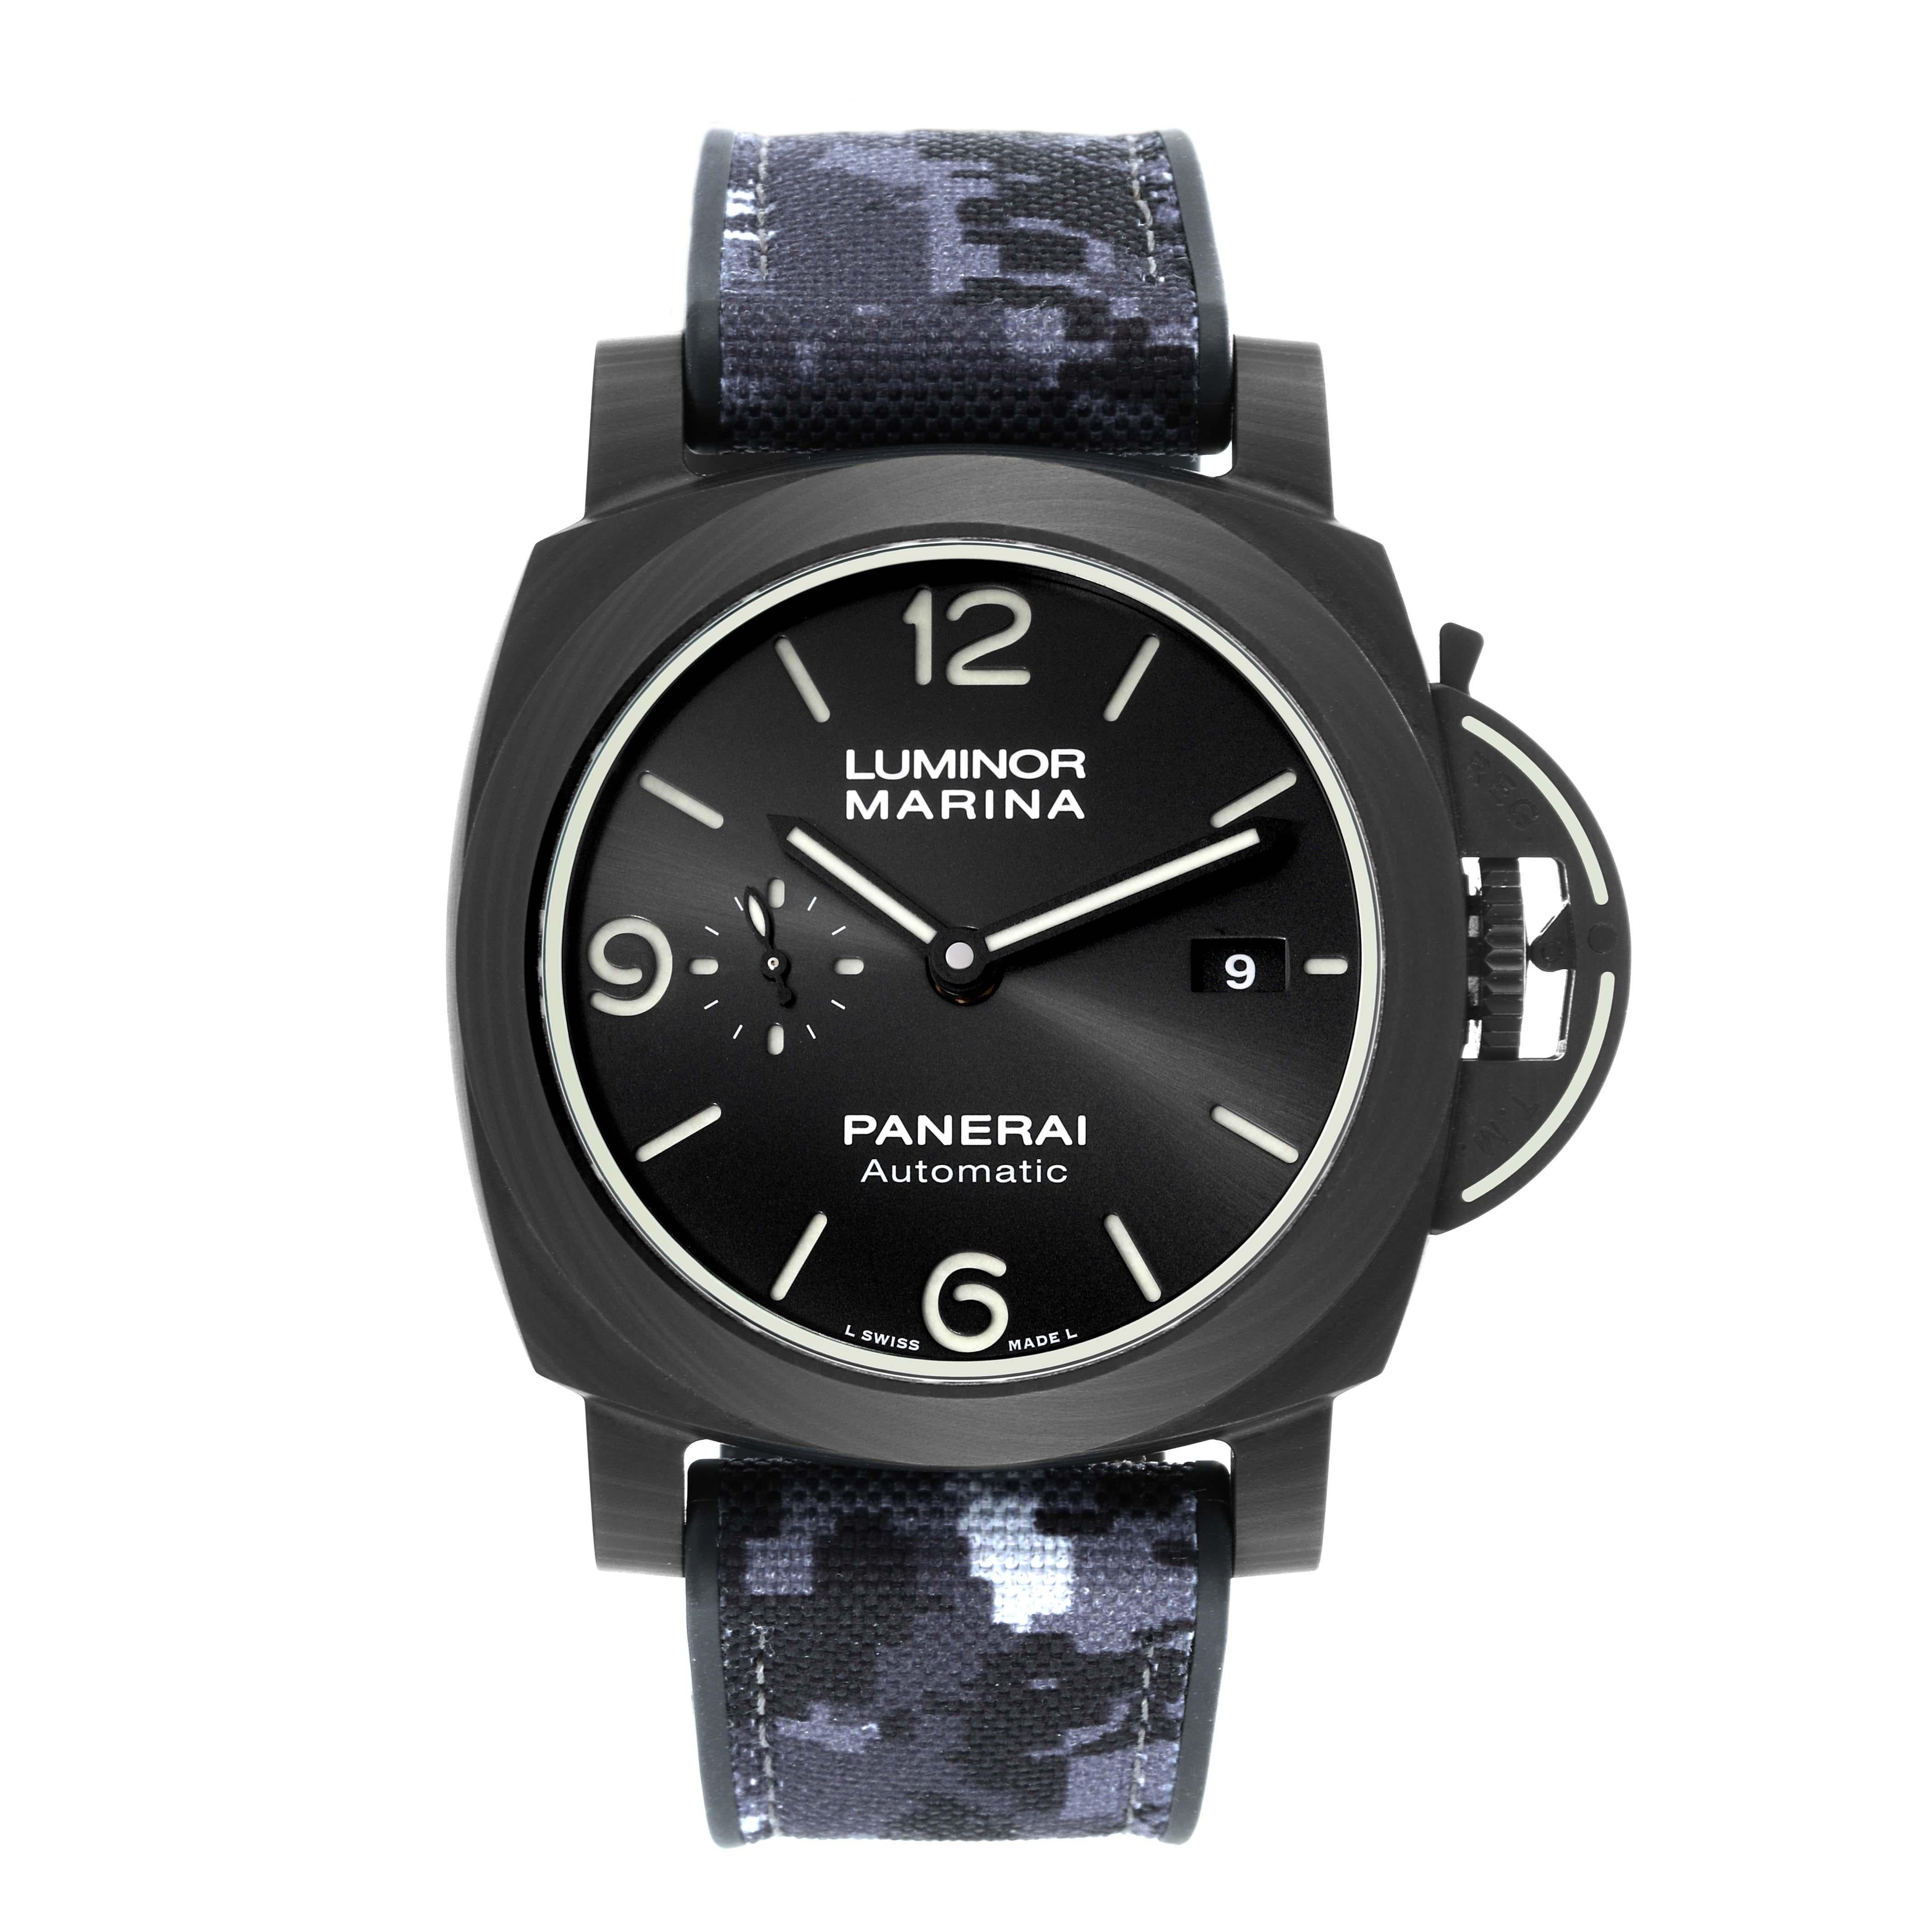 Panerai Luminor Marina Carbotech Titanium Mens Watch PAM01118 Box Card. Automatic self-winding movement. Two part cushion shaped titanium case 44.0 mm in diameter. Carbotech sloped bezel. Scratch resistant sapphire crystal. Black dial with luminous